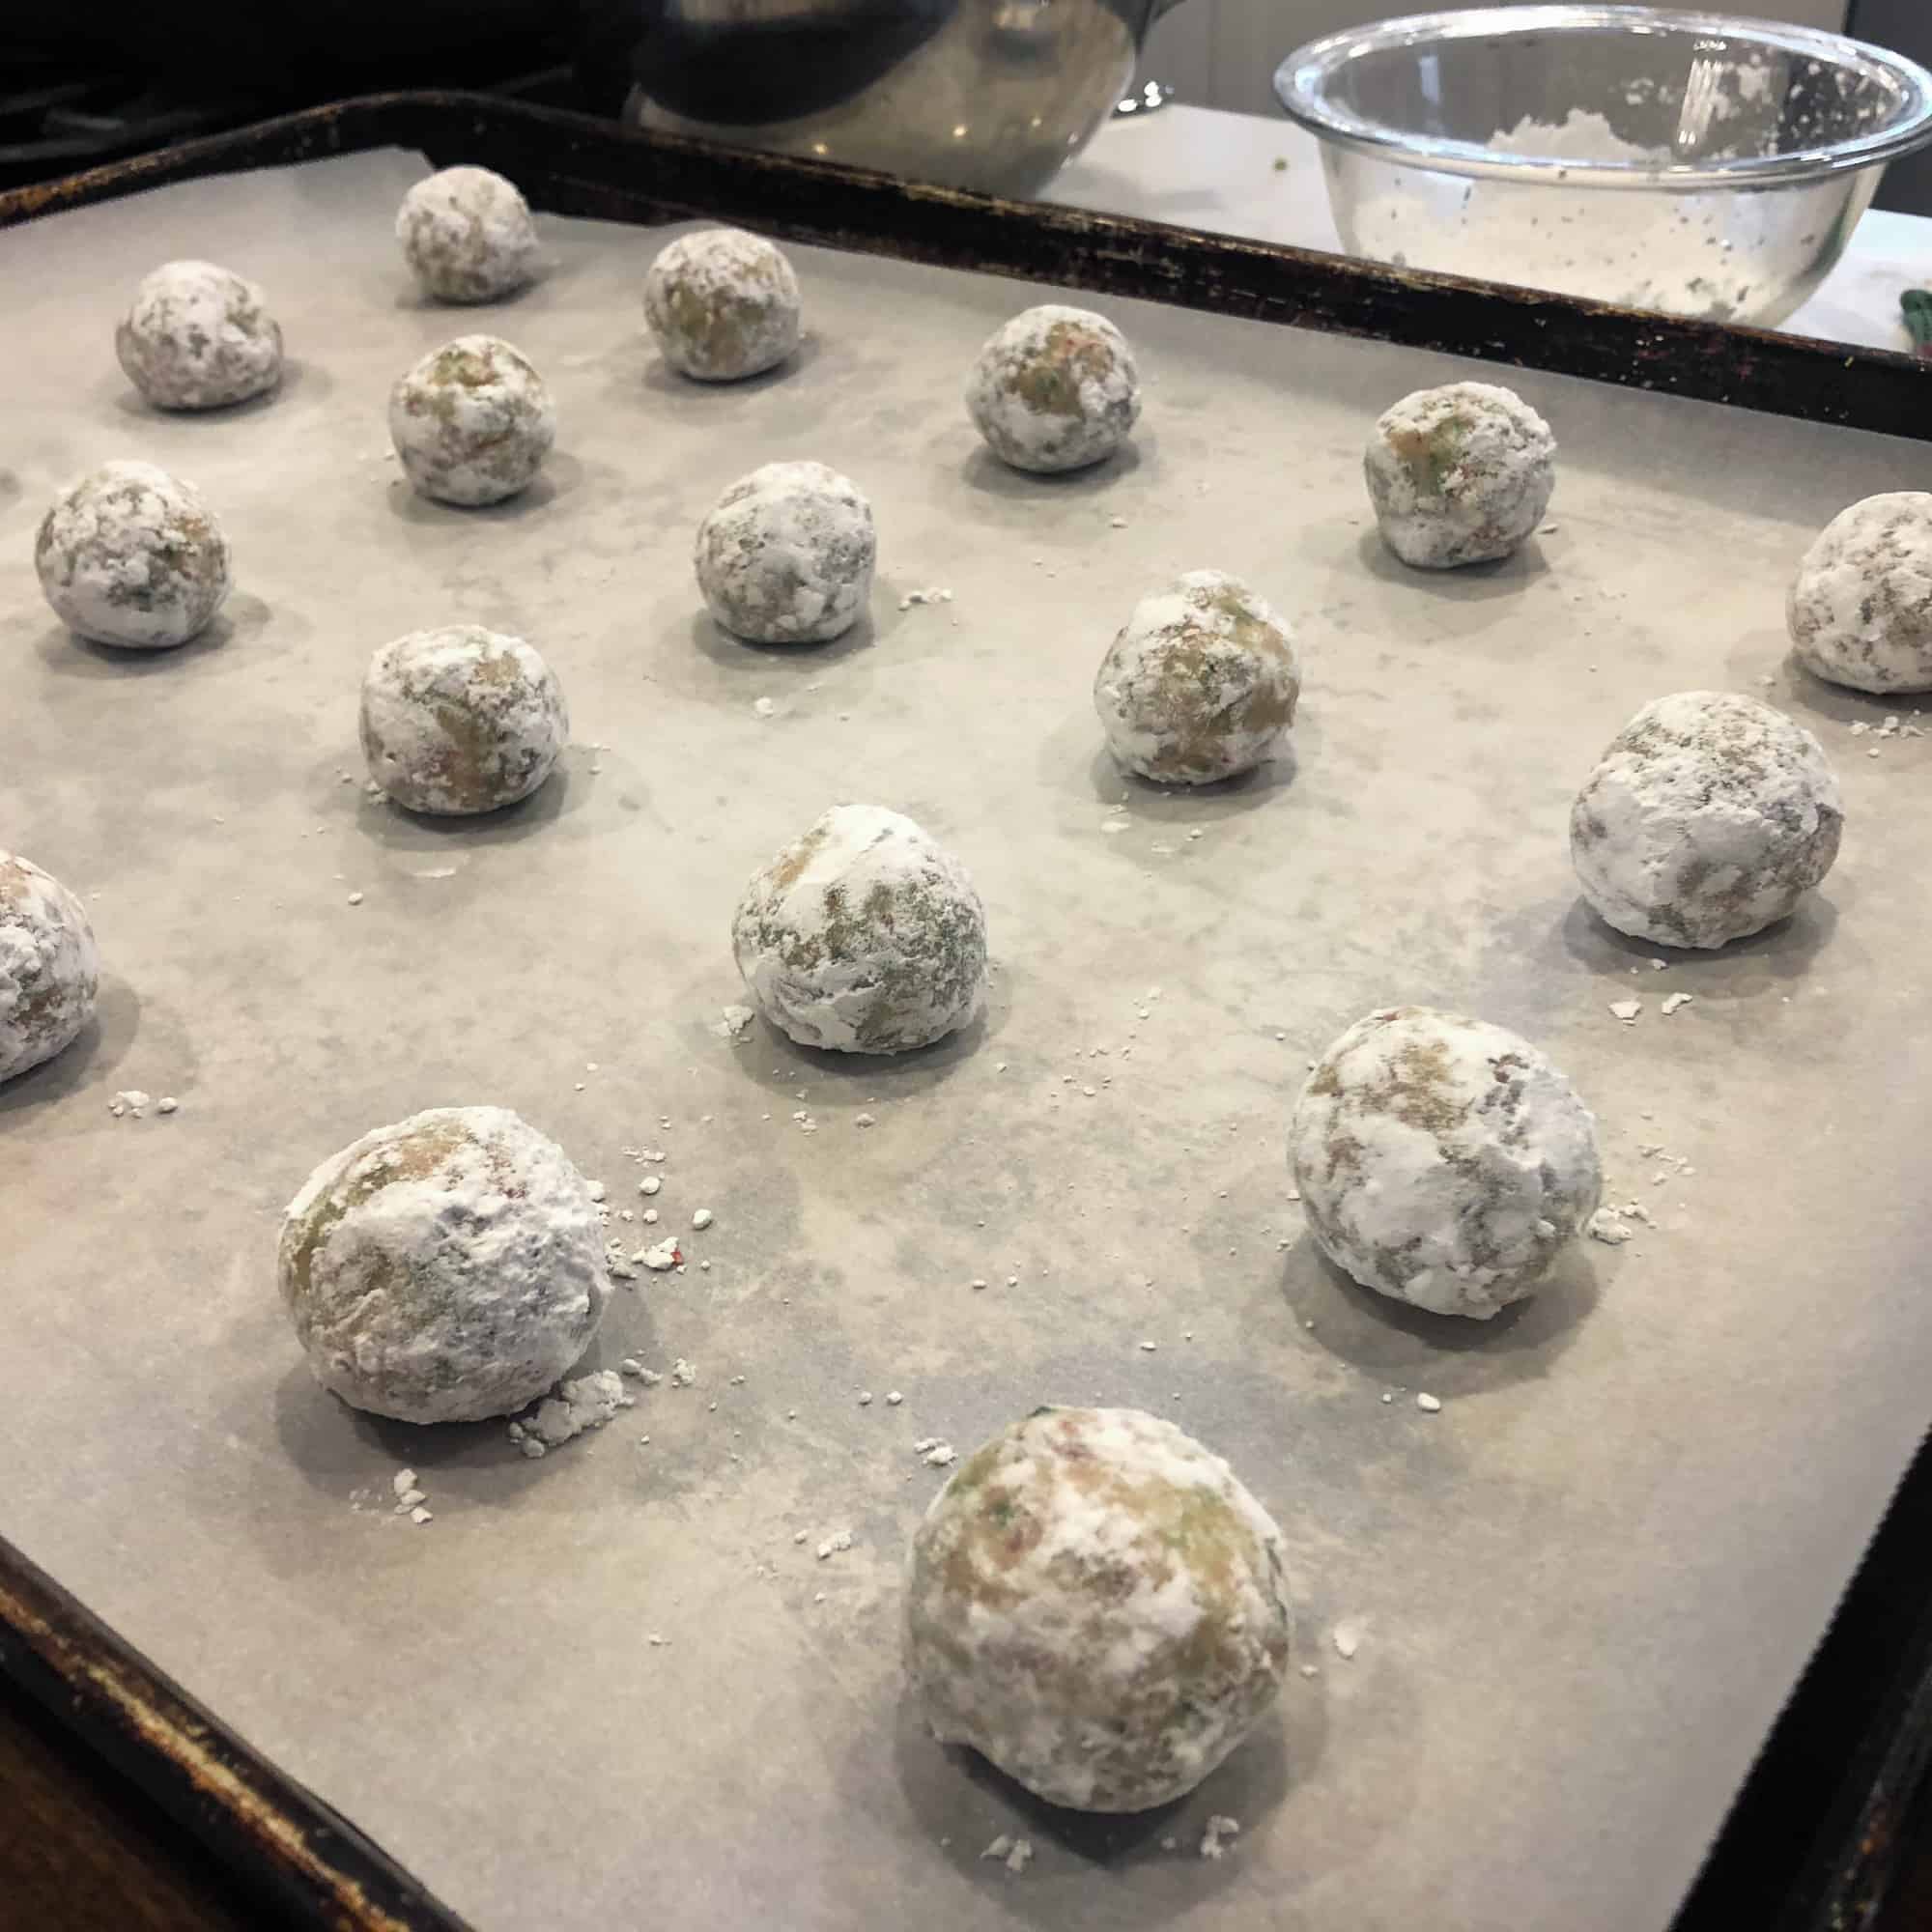 Place cookie dough balls on a baking sheet lined with parchment paper.